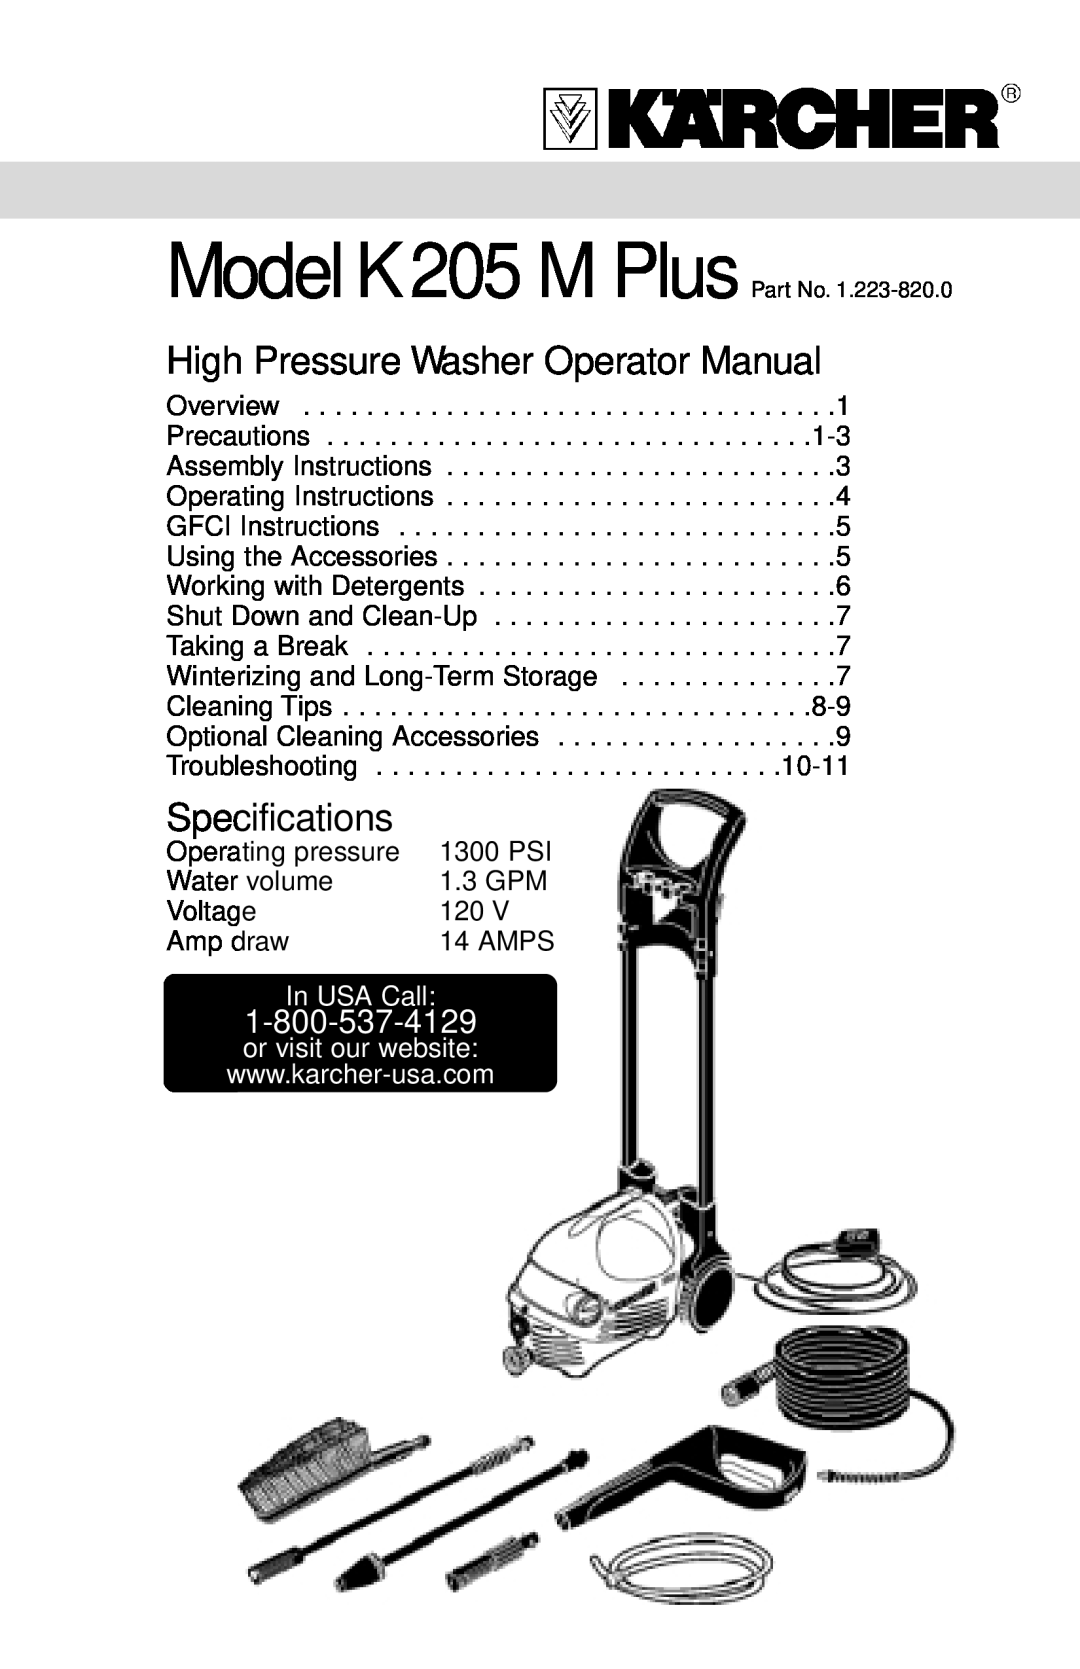 Karcher K205 M Plus specifications In USA Call, High Pressure Washer Operator Manual, Specifications 